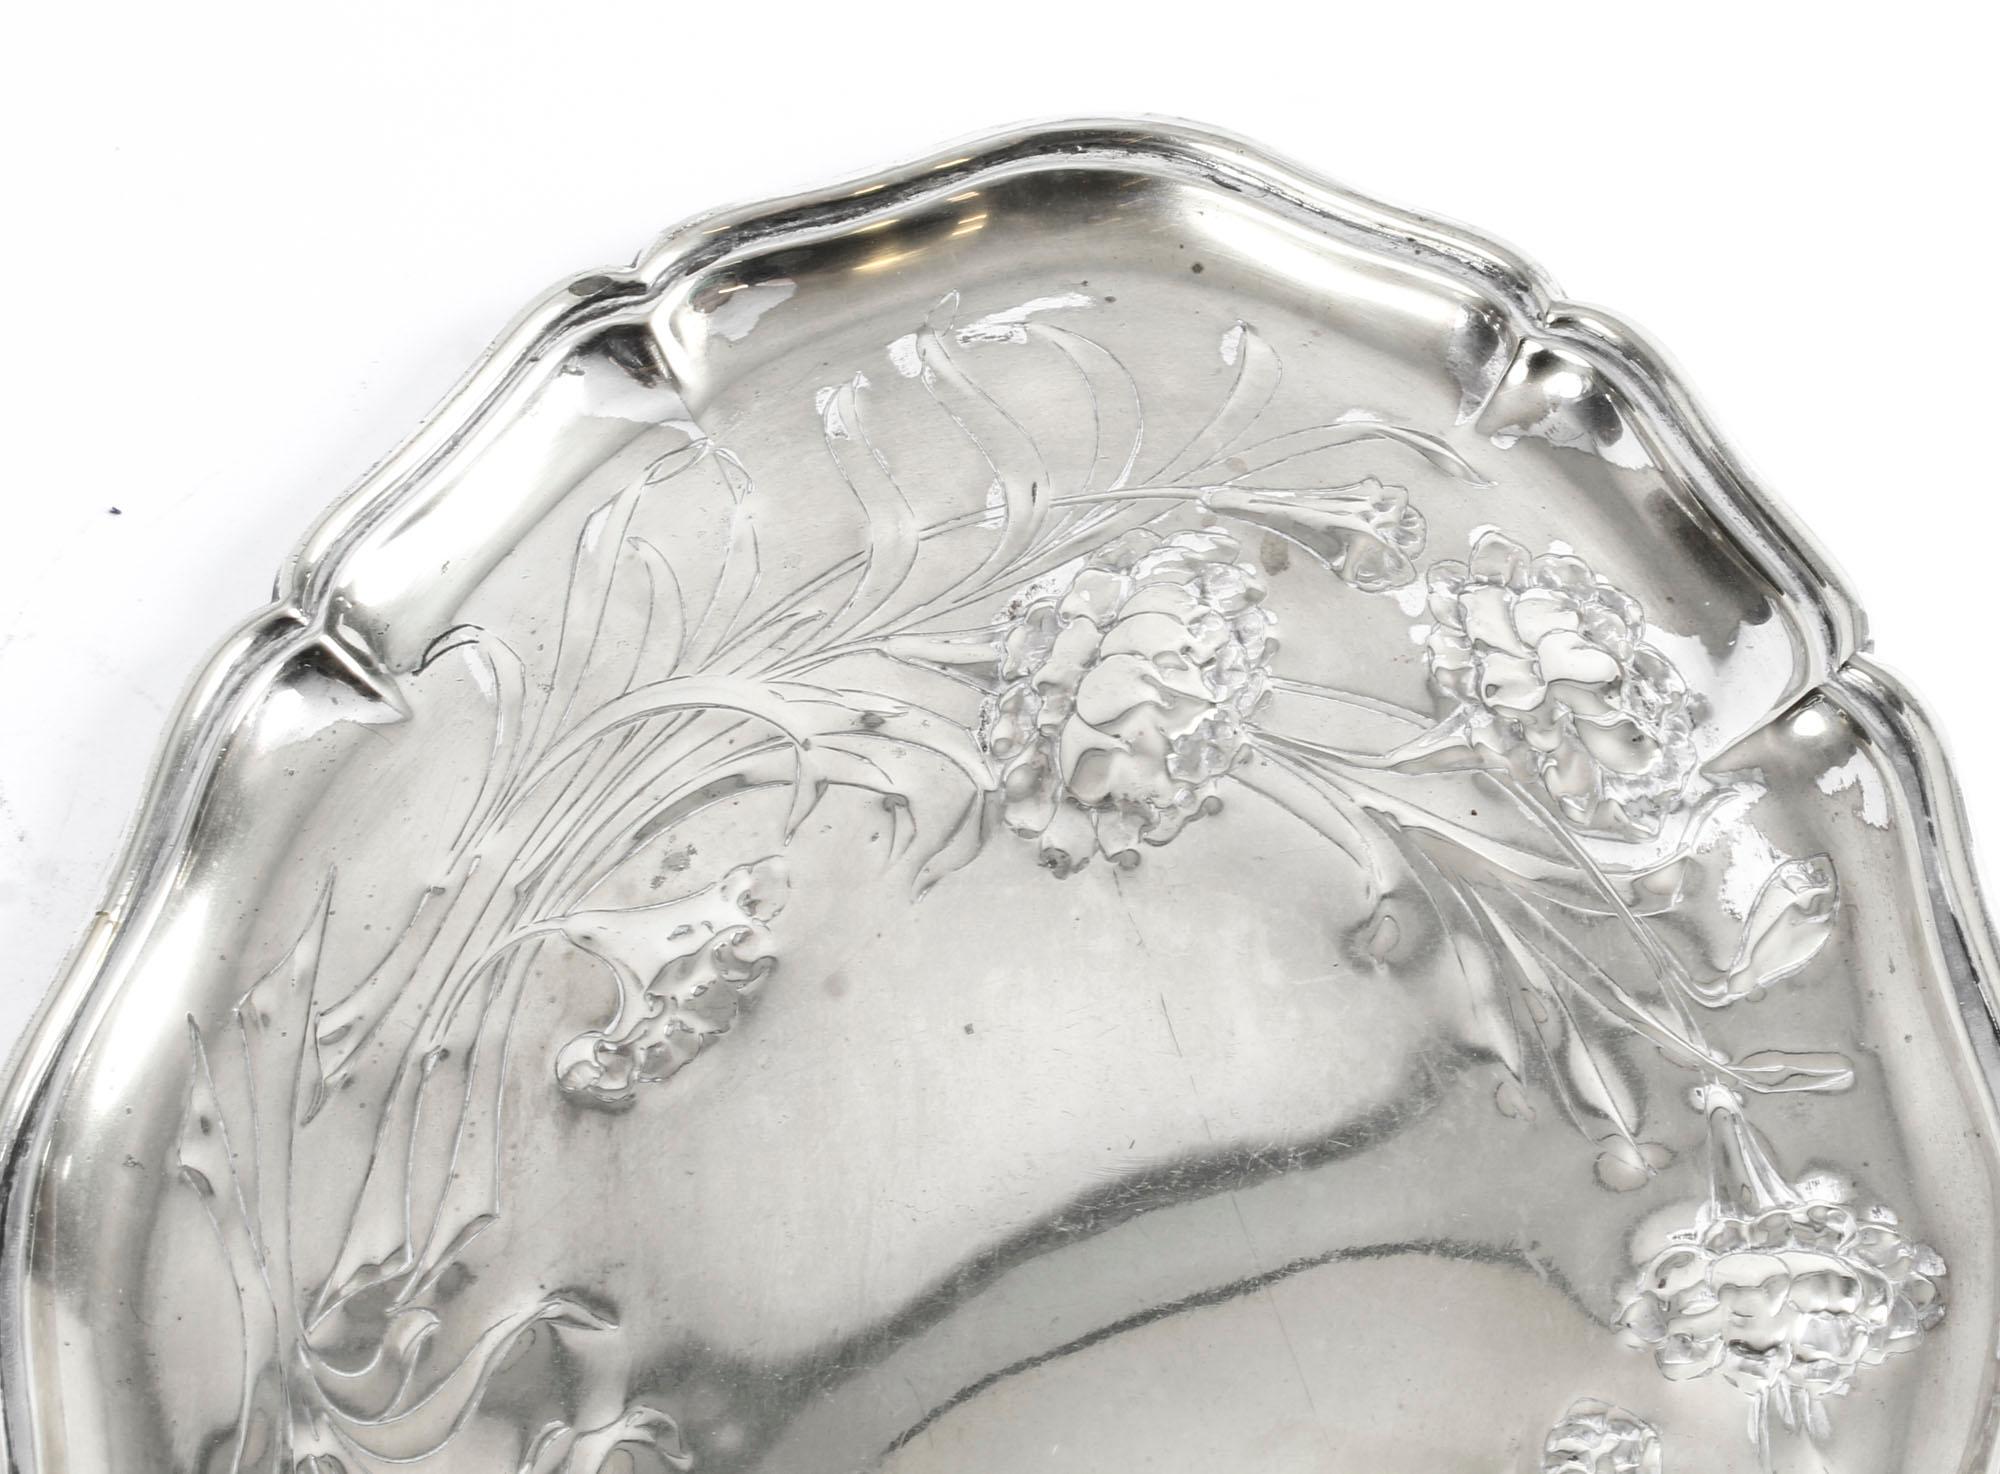 This is a beautiful English Art Nouveau silver plated dressing table tray, circa 1890 in date.

The tray has the hallmarks of the Sheffield-based silversmiths Lee and Wigfull (L&WS).

The tray is oval in shape, with lobed sides and raised edges.